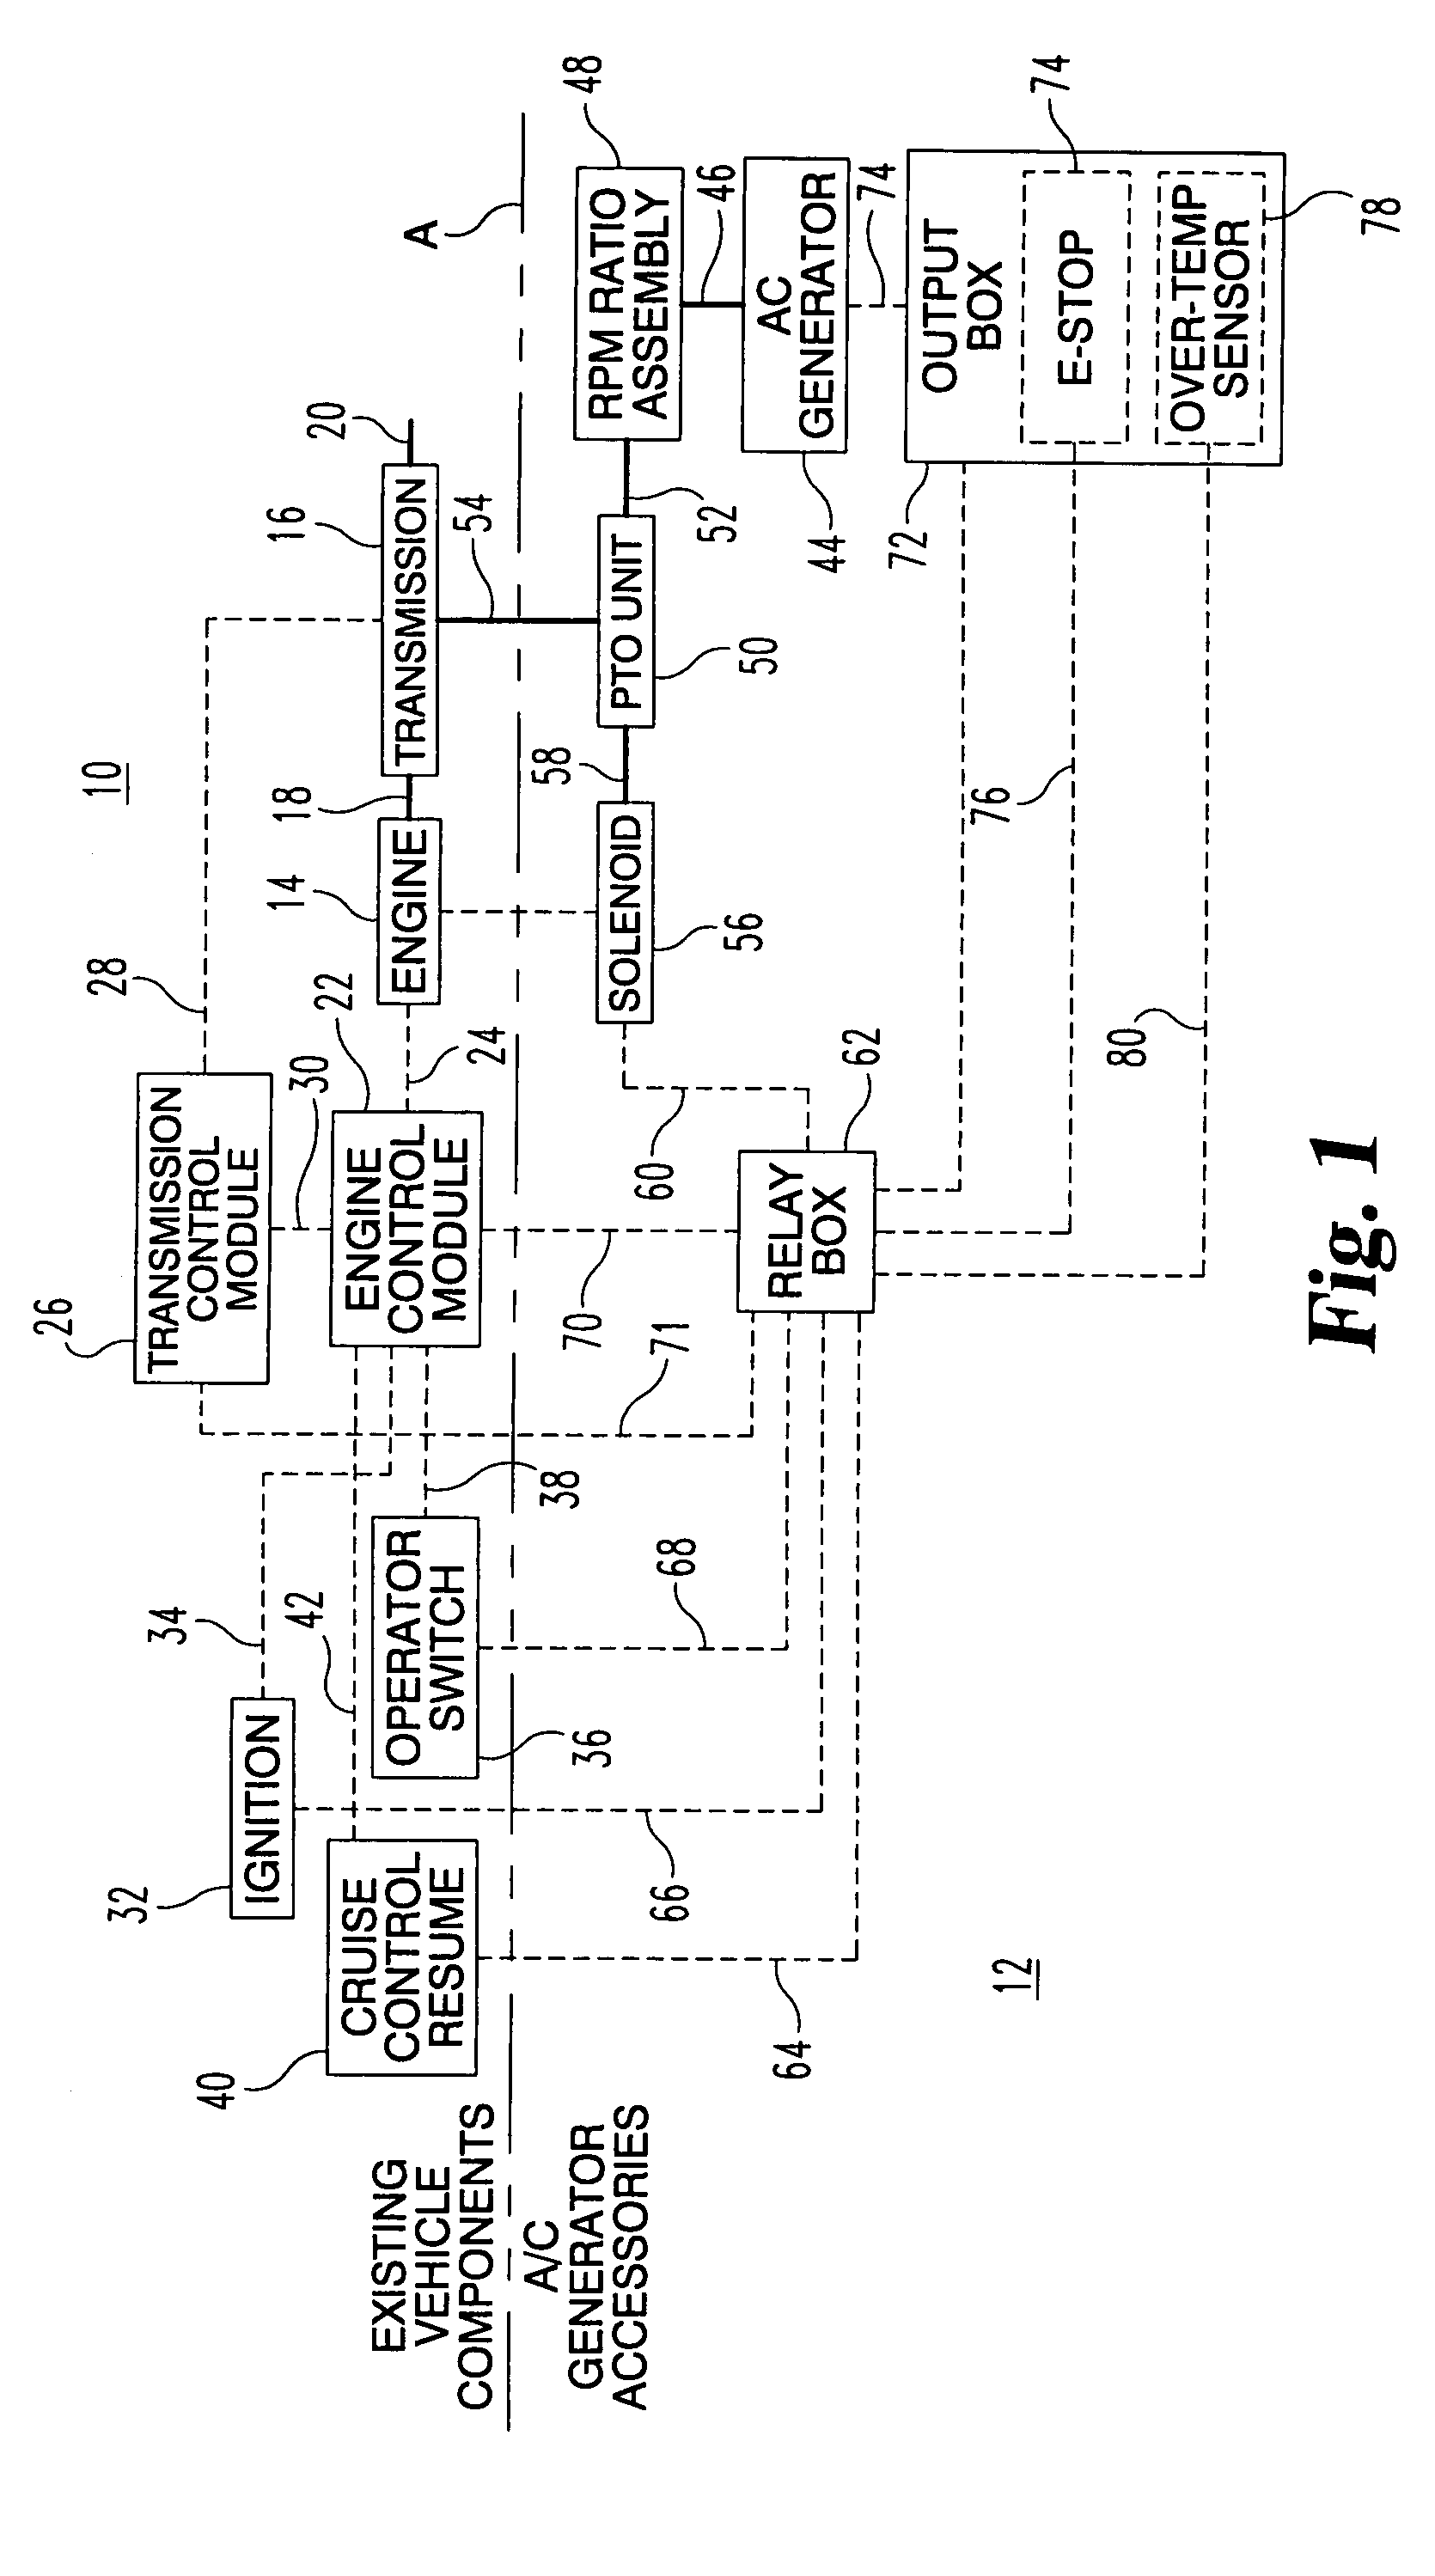 Vehicle mounted electrical generator system